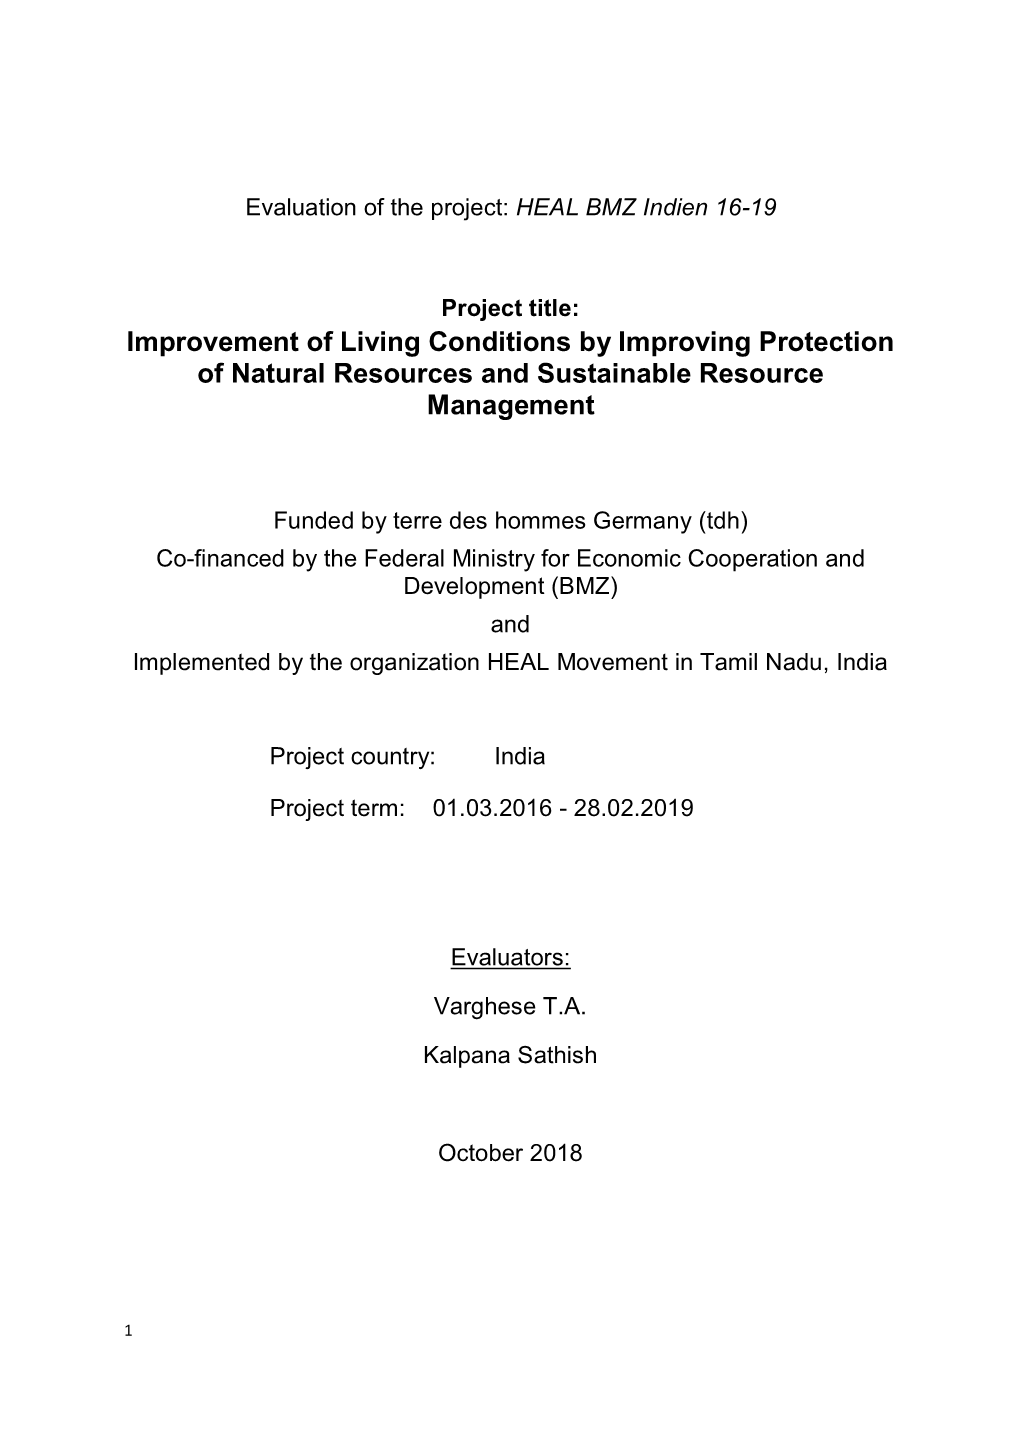 Improvement of Living Conditions by Improving Protection of Natural Resources and Sustainable Resource Management